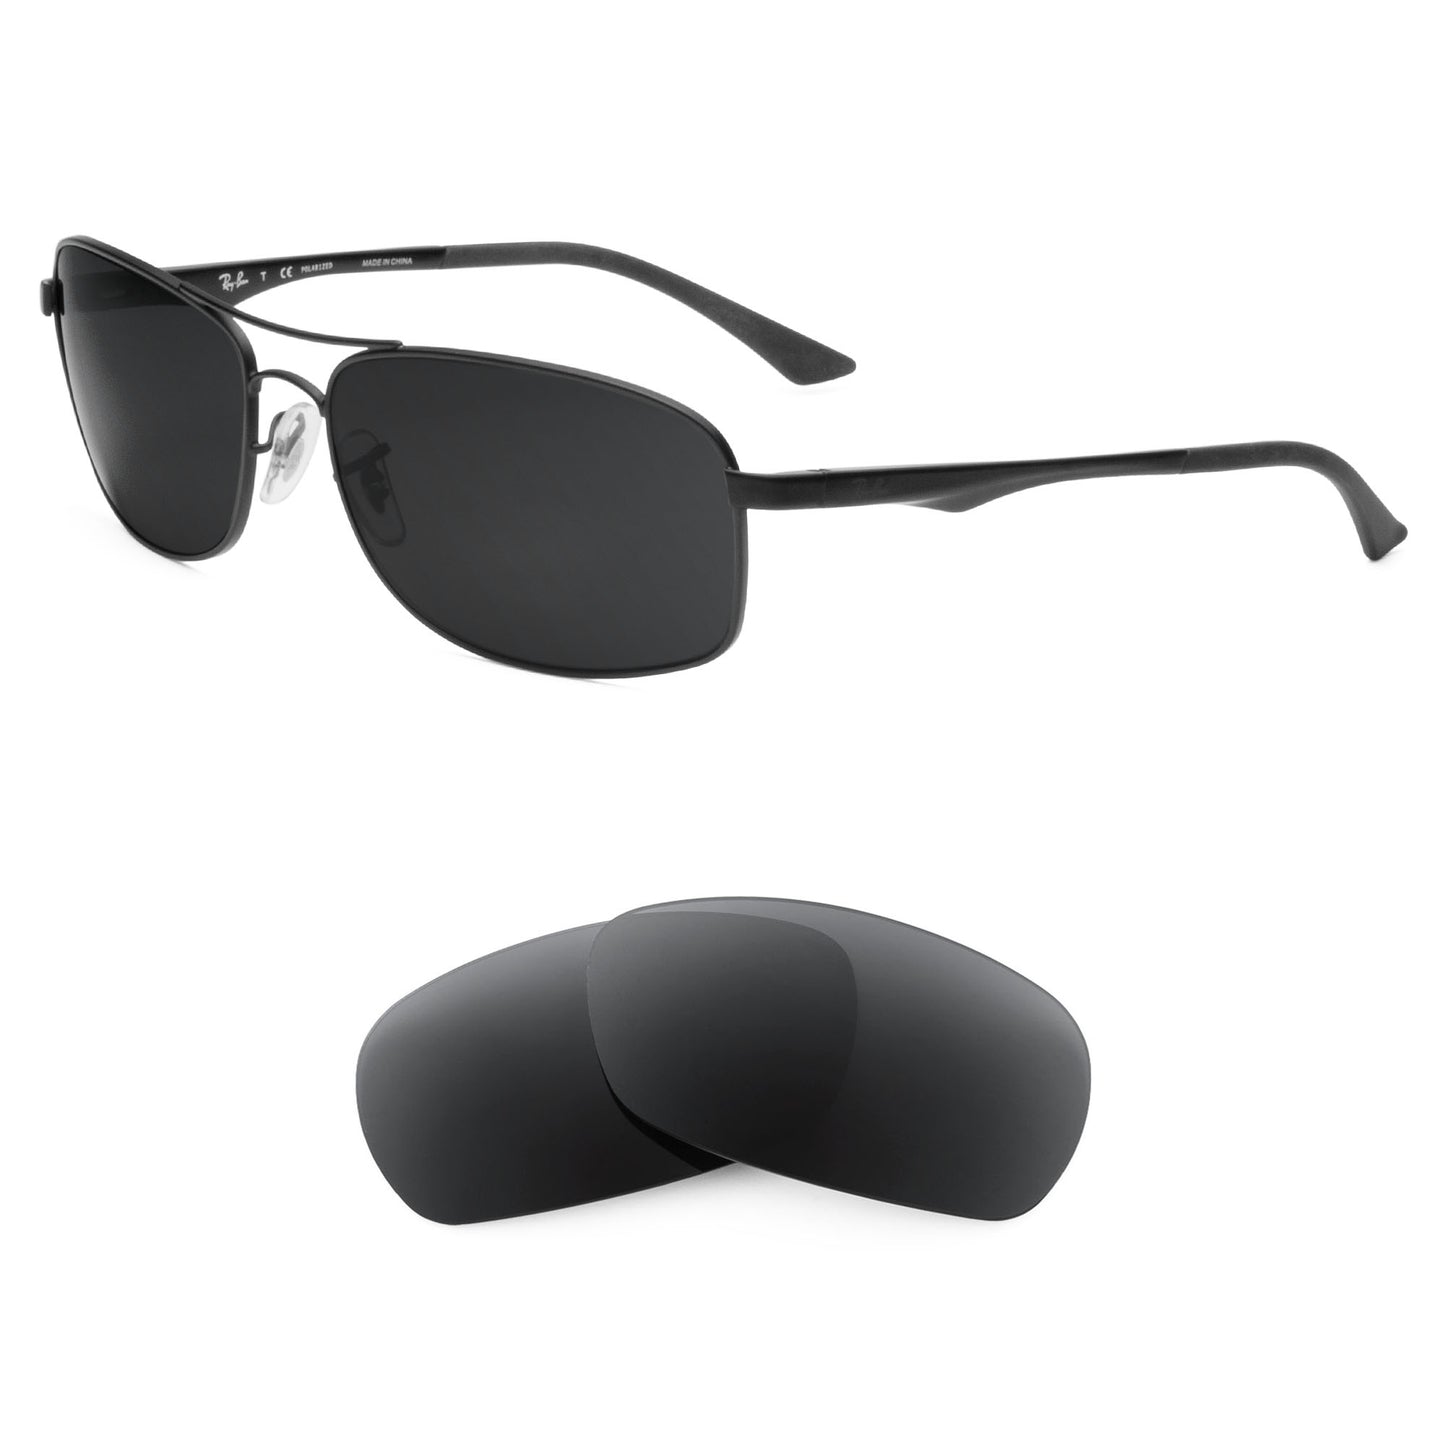 Ray-Ban RB3484 63mm sunglasses with replacement lenses